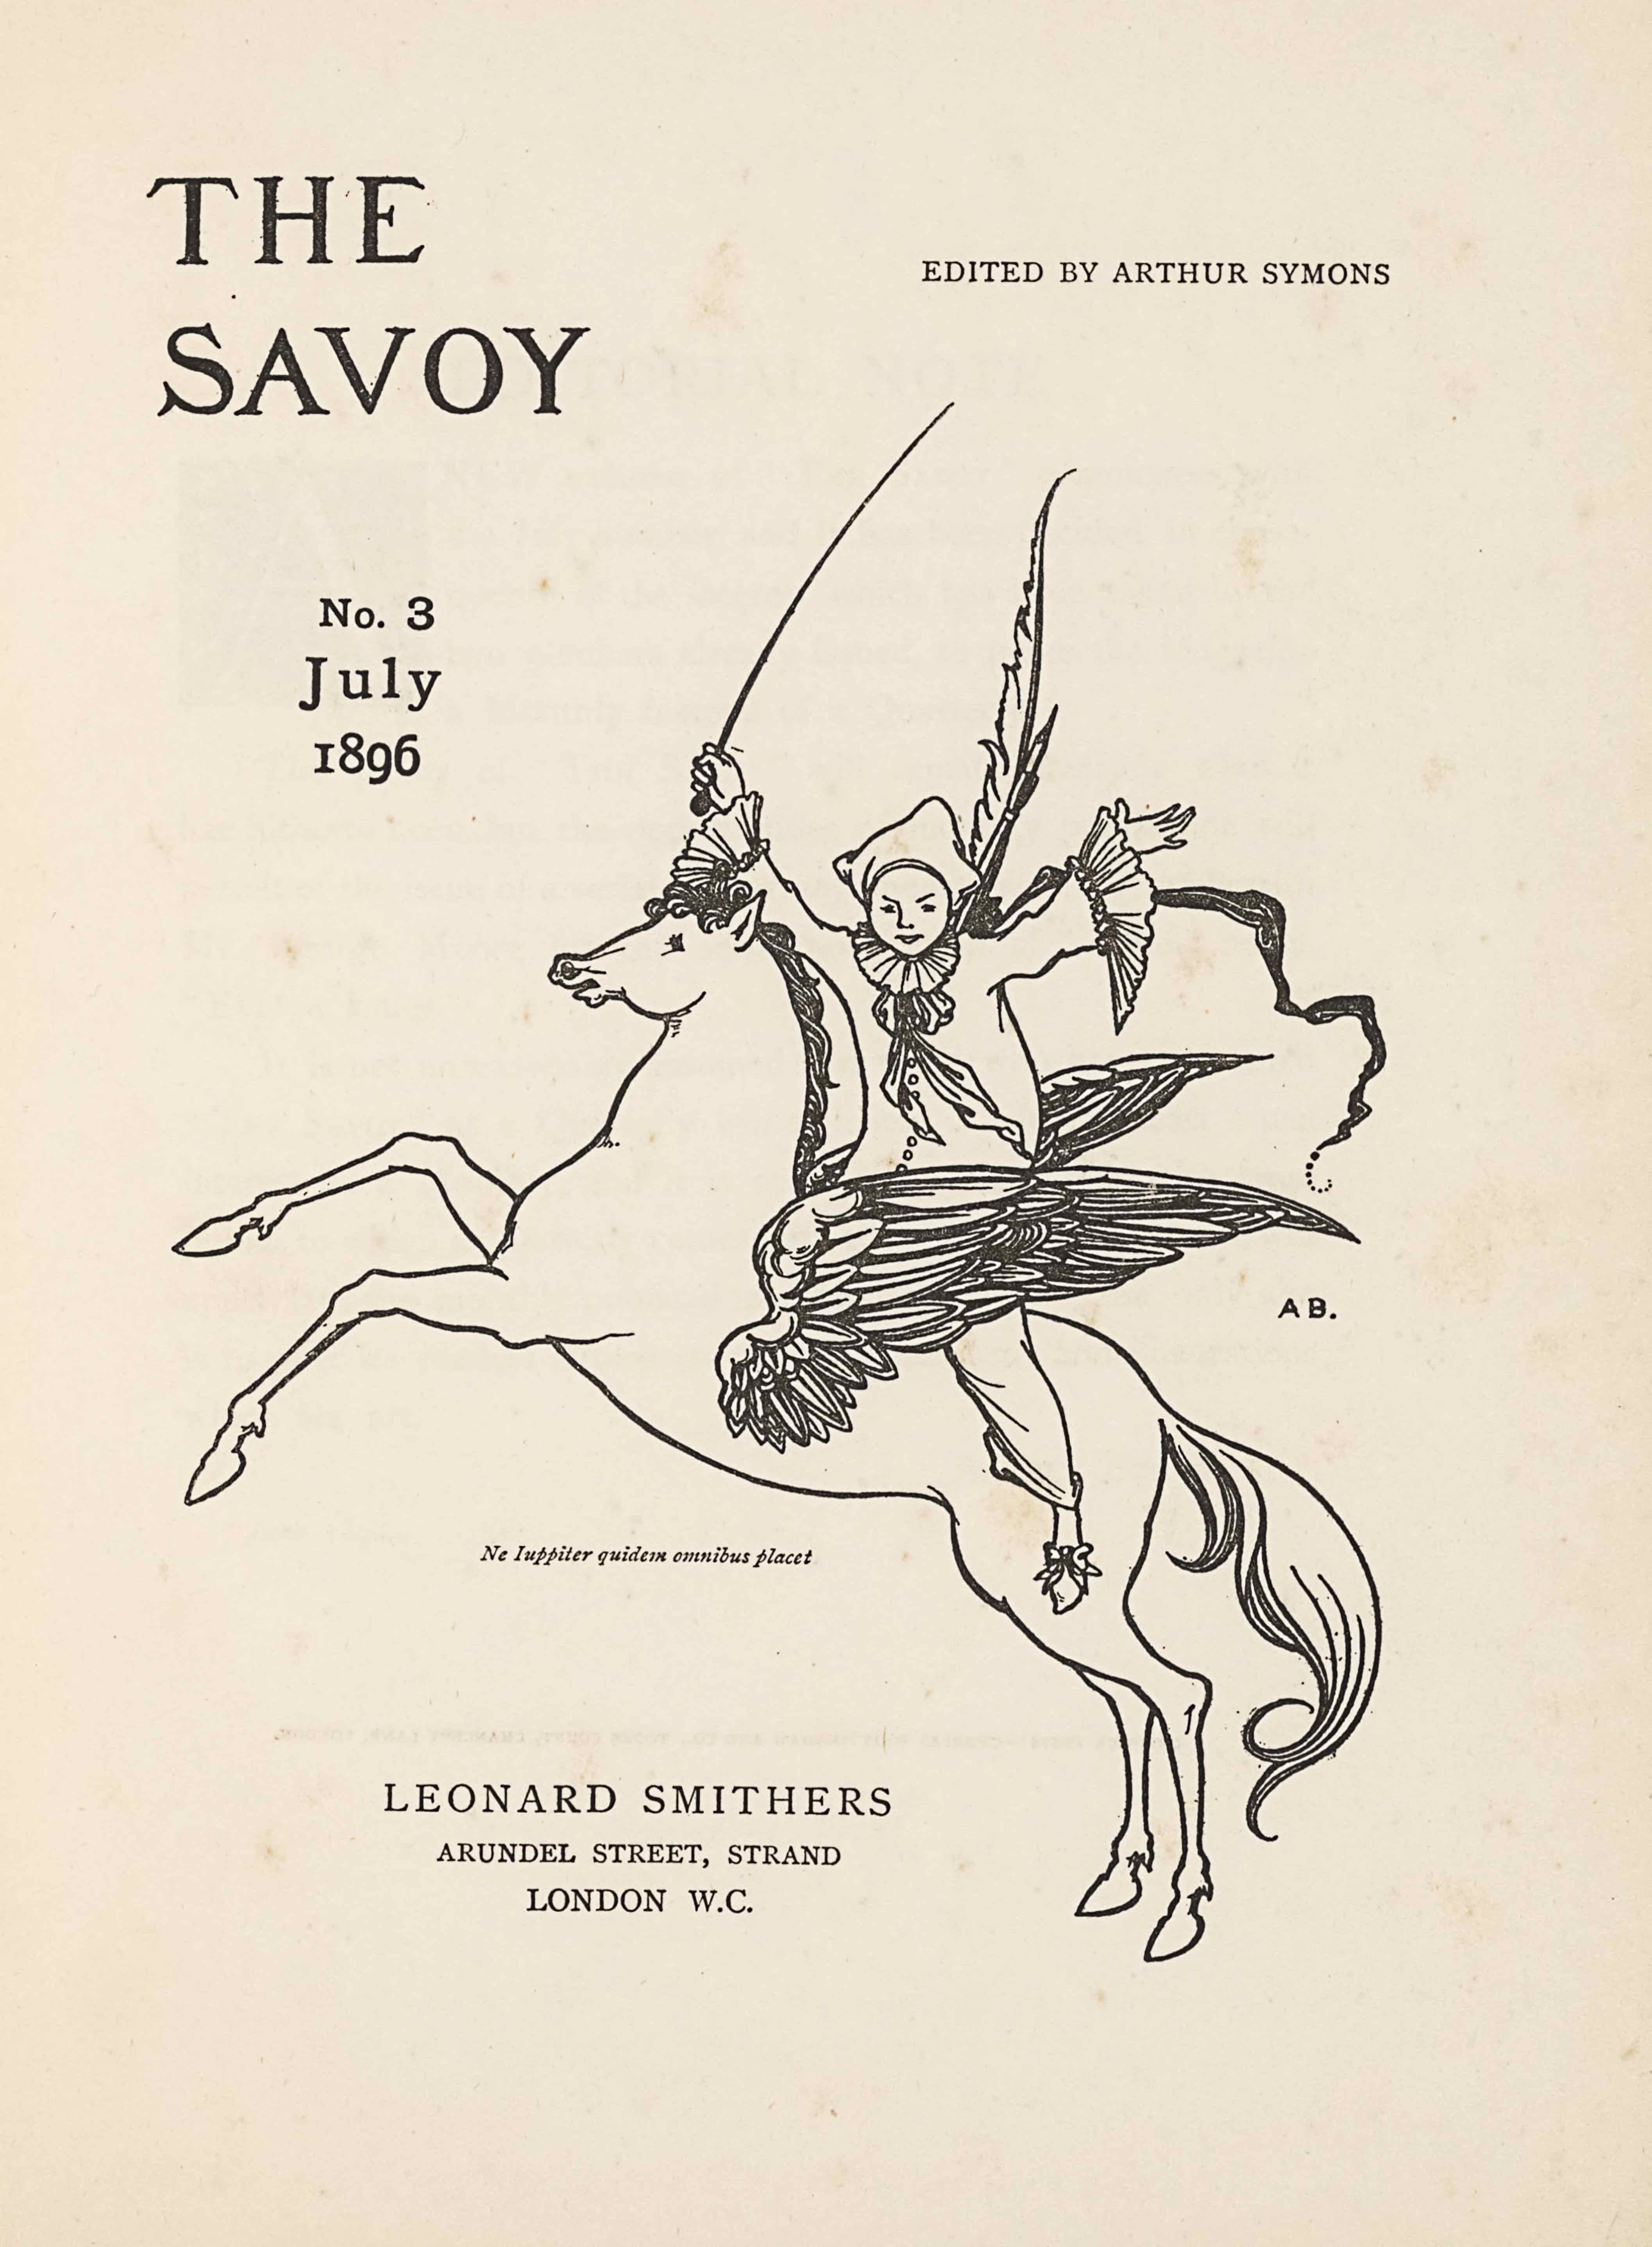 The unframed title page, in portrait orientation, combines a line-block reproduction of a pen-and-ink design with letterpress. The image shows one figure [a Pierrot] riding a winged horse [a Pegasus] in the centre of the page with publishing information printed in the surrounding area. In the upper left corner is the text: “THE” [large caps] and one line below the text: “SAVOY” [large caps]. These two lines of text are left-aligned and indicate the title: “THE SAVOY” [caps]. To the right side of the page and appearing in line with the centre of the title text is the editing information: “EDITED BY ARTHUR SYMONS” [small caps]. Below the title on the left side of the page, still in about the top third, is the text: “No. 3”, and below that the text: “July”, and below that line: “1896”. These three lines are centered with each other. To the right of this text is the image of the figure on the horse. The horse and figure are facing towards the left; the horse is in profile and the figure is turned to face the viewer. The horse is rearing, with both front legs lifted up into the air. The horse spans the width of the page and is about half of the page height. The horse has a long tail trailing behind. The horse’s mouth is slightly opened and the pointed ears are pulled back. The mane is curled and a few pieces fall forwards toward the eyes. The horse has large wings emerging from the sides of its ribcage. The wings are made up of many feathers of various sizes and are formed like eagle wings, with a smaller section on the bottom half and a larger pointed portion of wing on the top half. Between the wings sits a male figure dressed like a Pierrot or clown. The figure has his upper body turned to face the viewer, with both arms opened wide and lifted up into the air. He is wearing slippers with a bow on the toe, baggy pants that fall just above the ankle, and a baggy shirt that has buttons up the front. The shirt has large ruffles on the sleeve hems and a large ruffle around the figure’s neck, finished with a ruff and flowing, loosely tied bow. He is wearing a white three-cornered hat. The figure has a long whip in his right hand that extends high above him. A feather pen and paint brush extend over his shoulder behind his back, and a banner or pennant flows behind him. To the right of the centre of the horse and figure, just below the right wing tip, is the small text: “A B.” [caps]. A Latin epigraph appears just below the belly of the horse, very small and italicized, which reads: “Ne luppiter quidem omnibus placet” [Not even Jupiter can please everyone]. Centered below are the three final lines of text. The first line, and largest sized text of the three, reads: “LEONARD SMITHERS” [caps]. The second line reads: “ARUNDEL STREET, STRAND” [caps]. The third and final line centered below is the mid-size between the above two lines, and it reads: “LONDON W.C.” [caps].